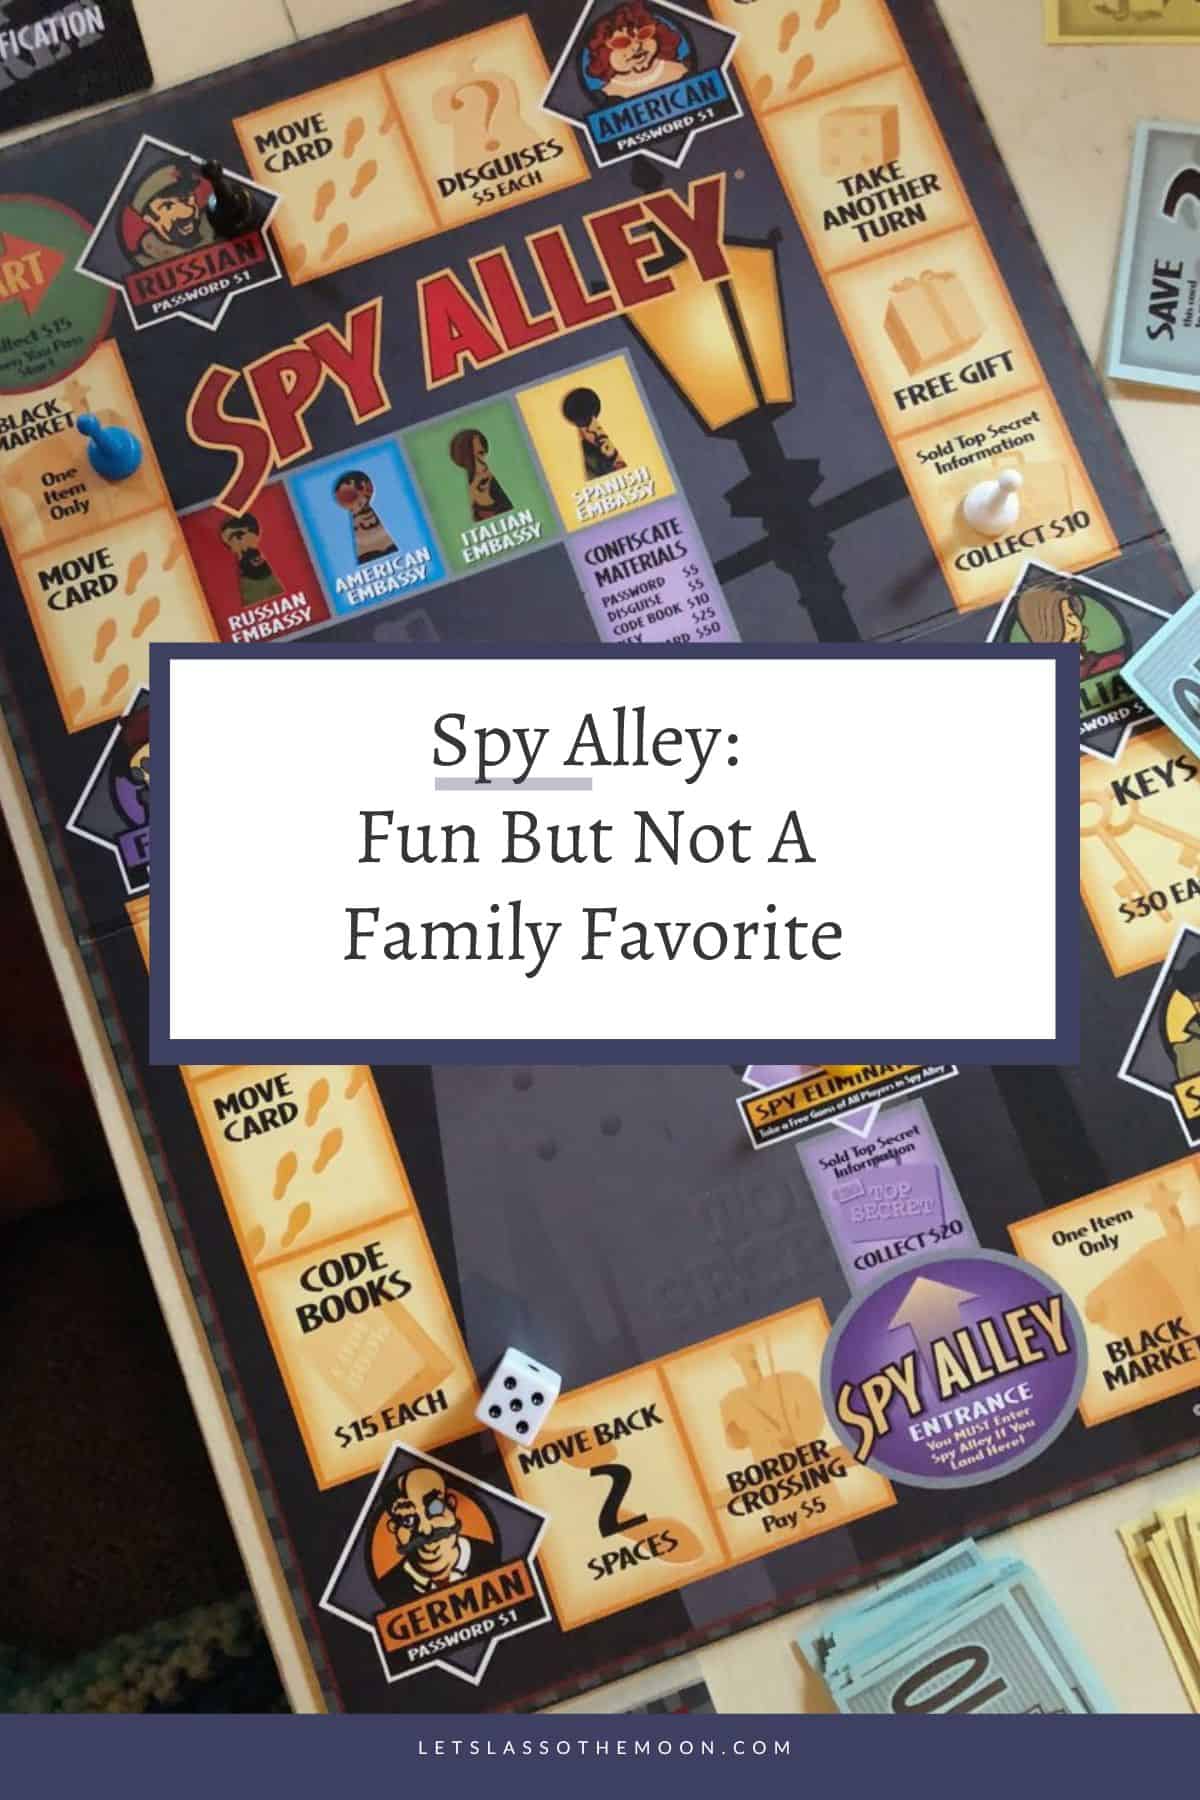 A collage of images of the Spy Alley board game with the article headline for Pinterest.